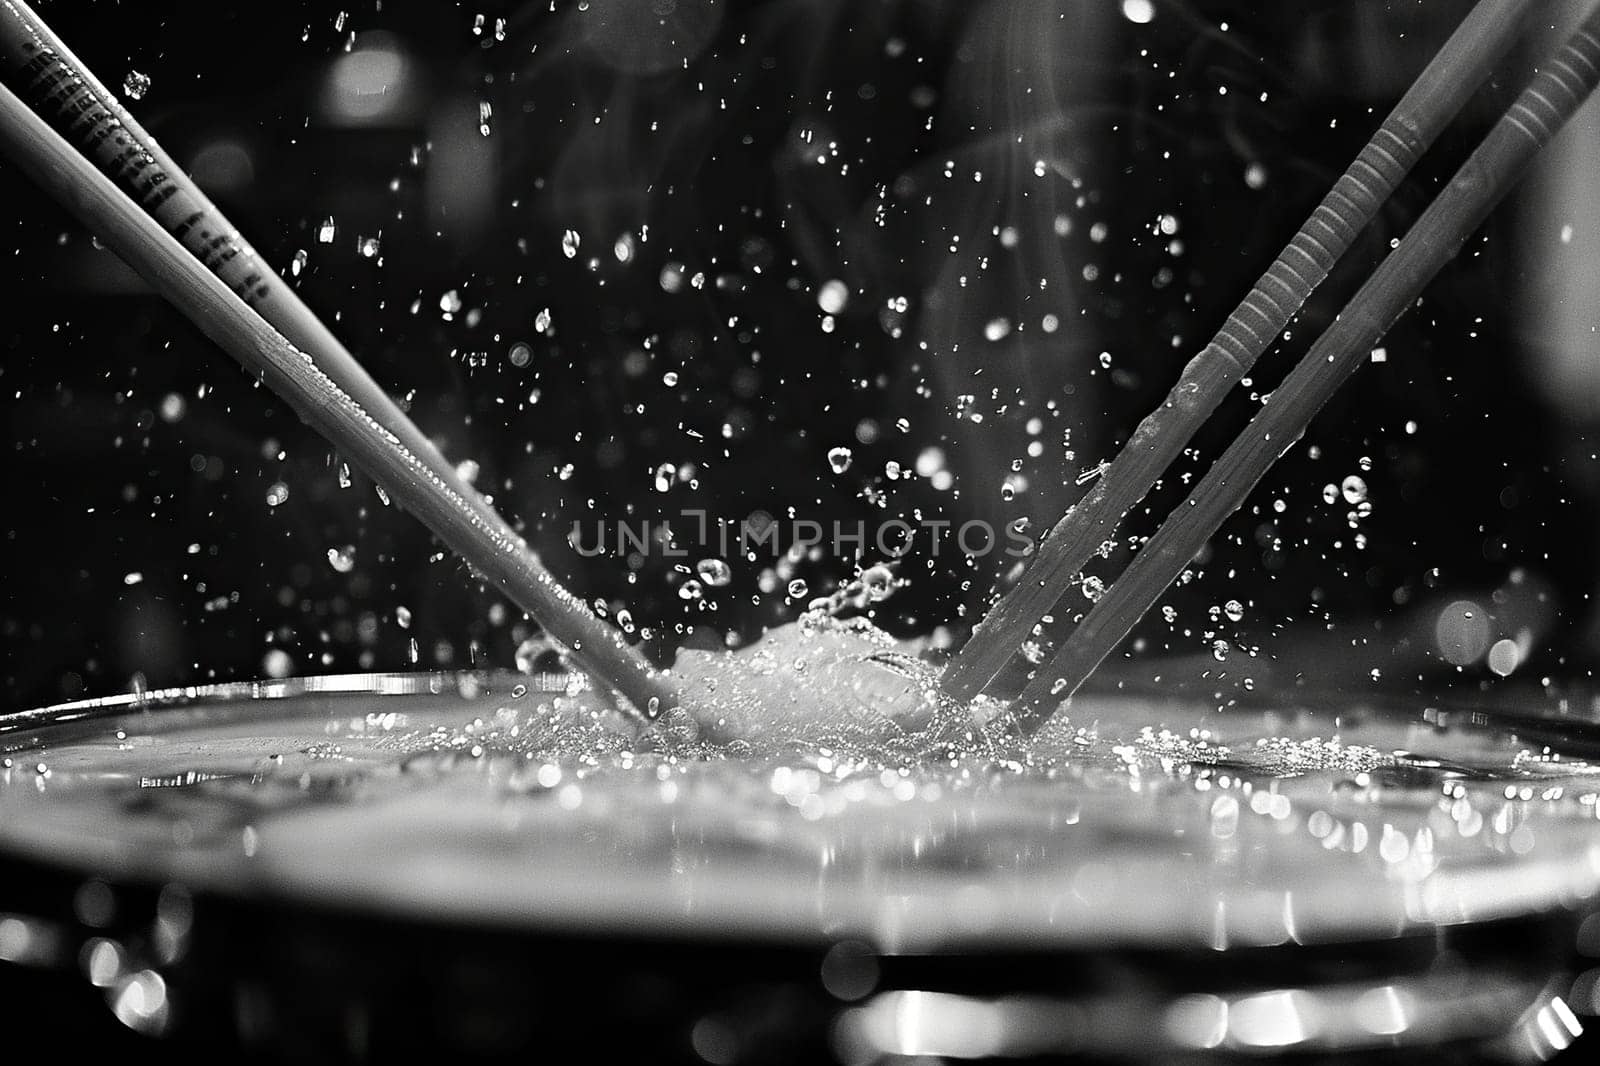 Drumsticks on a wet drum, close-up. Live music concept. Black and white.